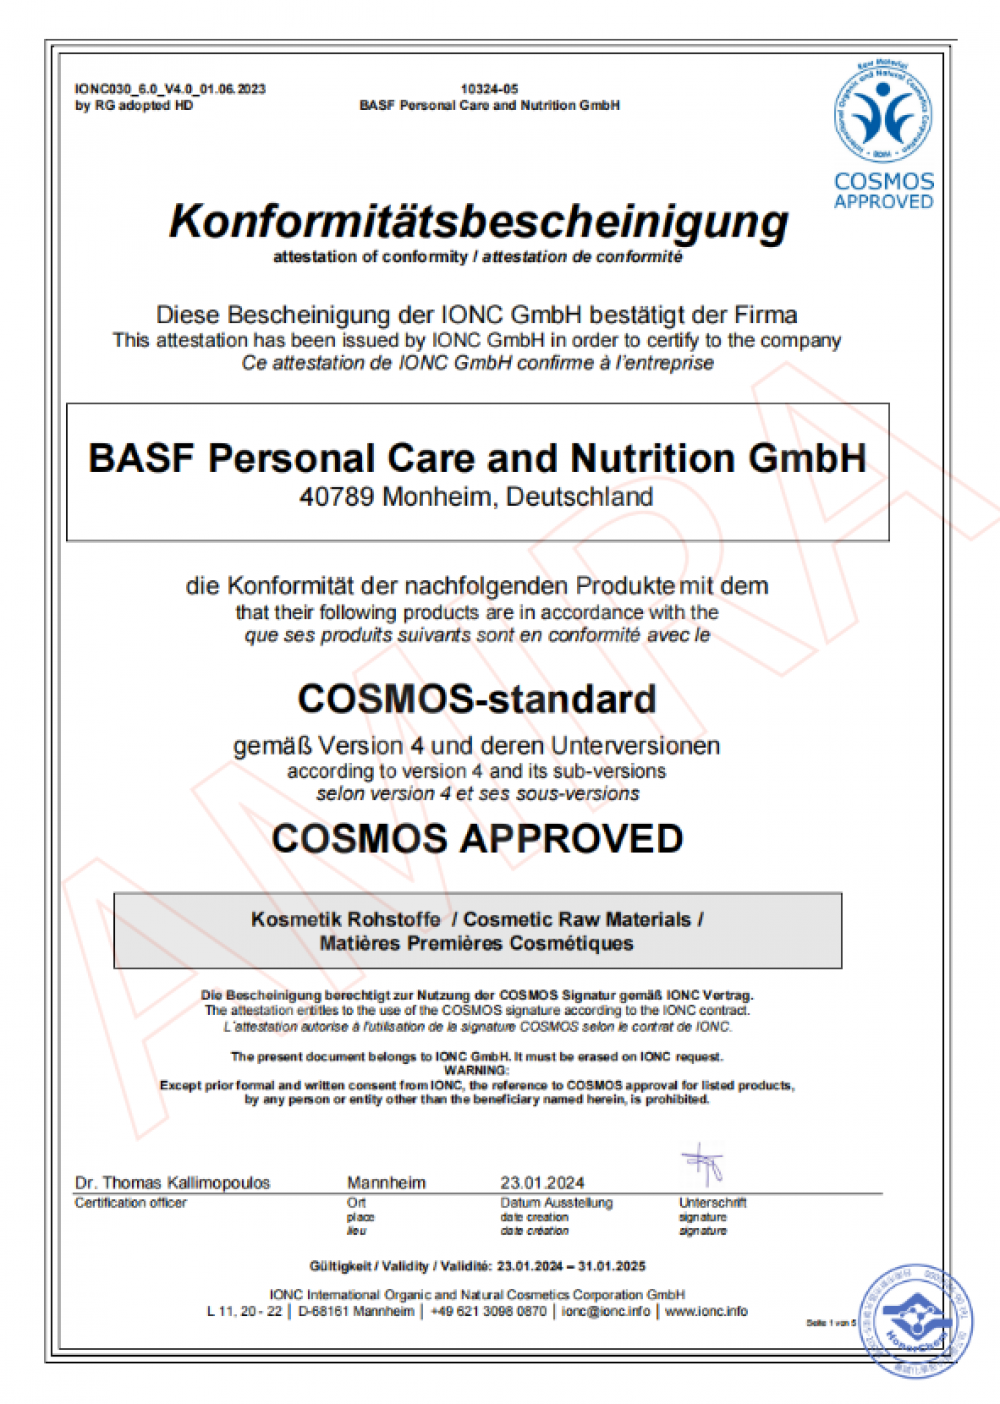 BASF-COSMOS APPROVED